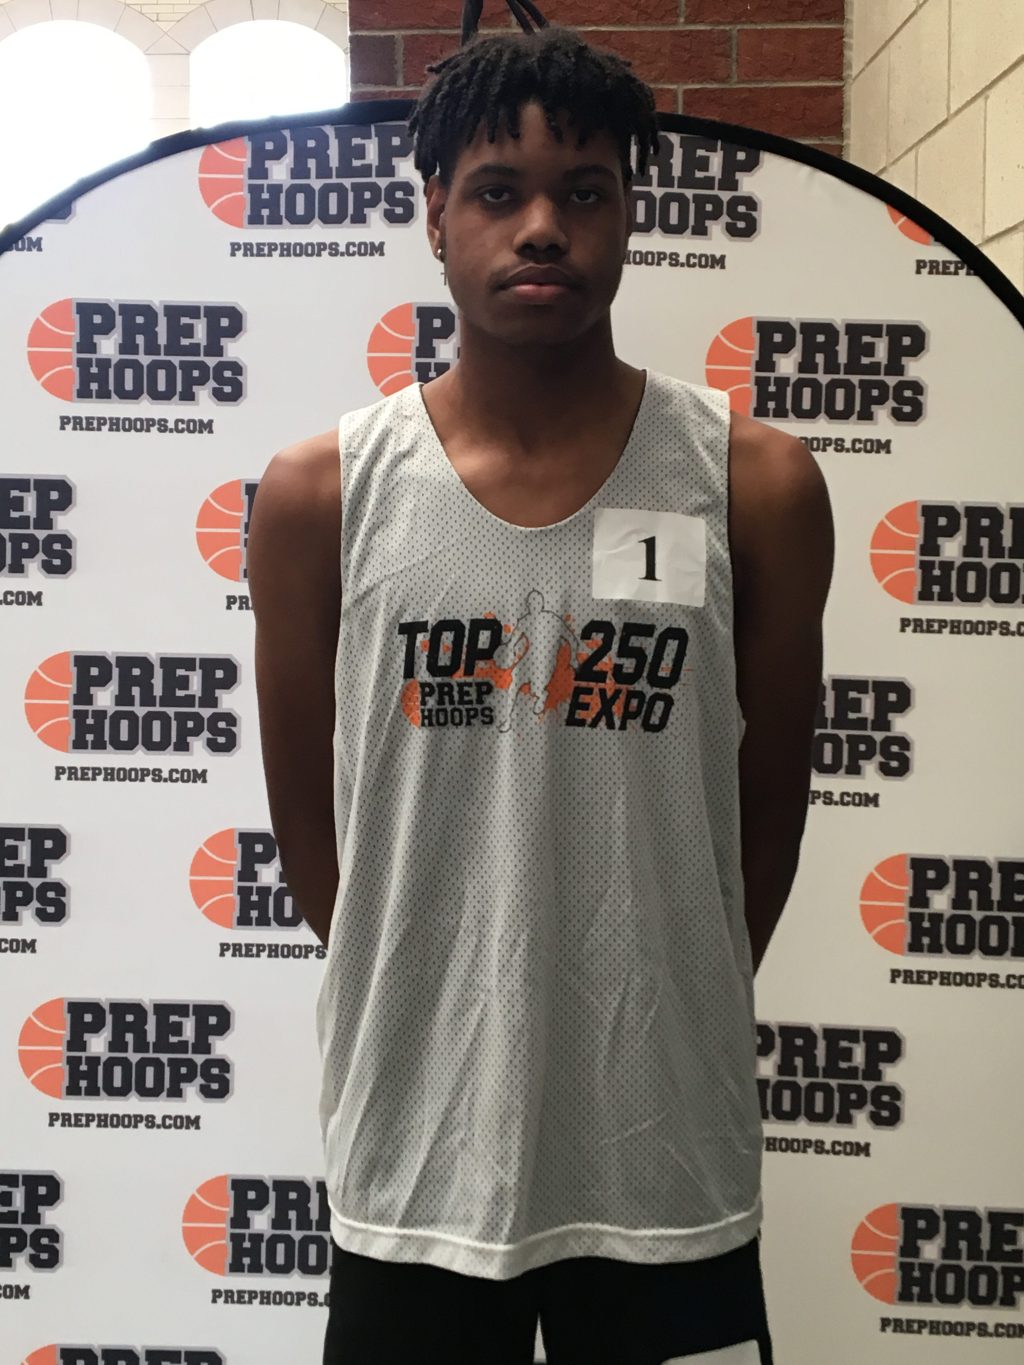 2021 Rankings: Top 10 Center Prospects (Summer Edition)